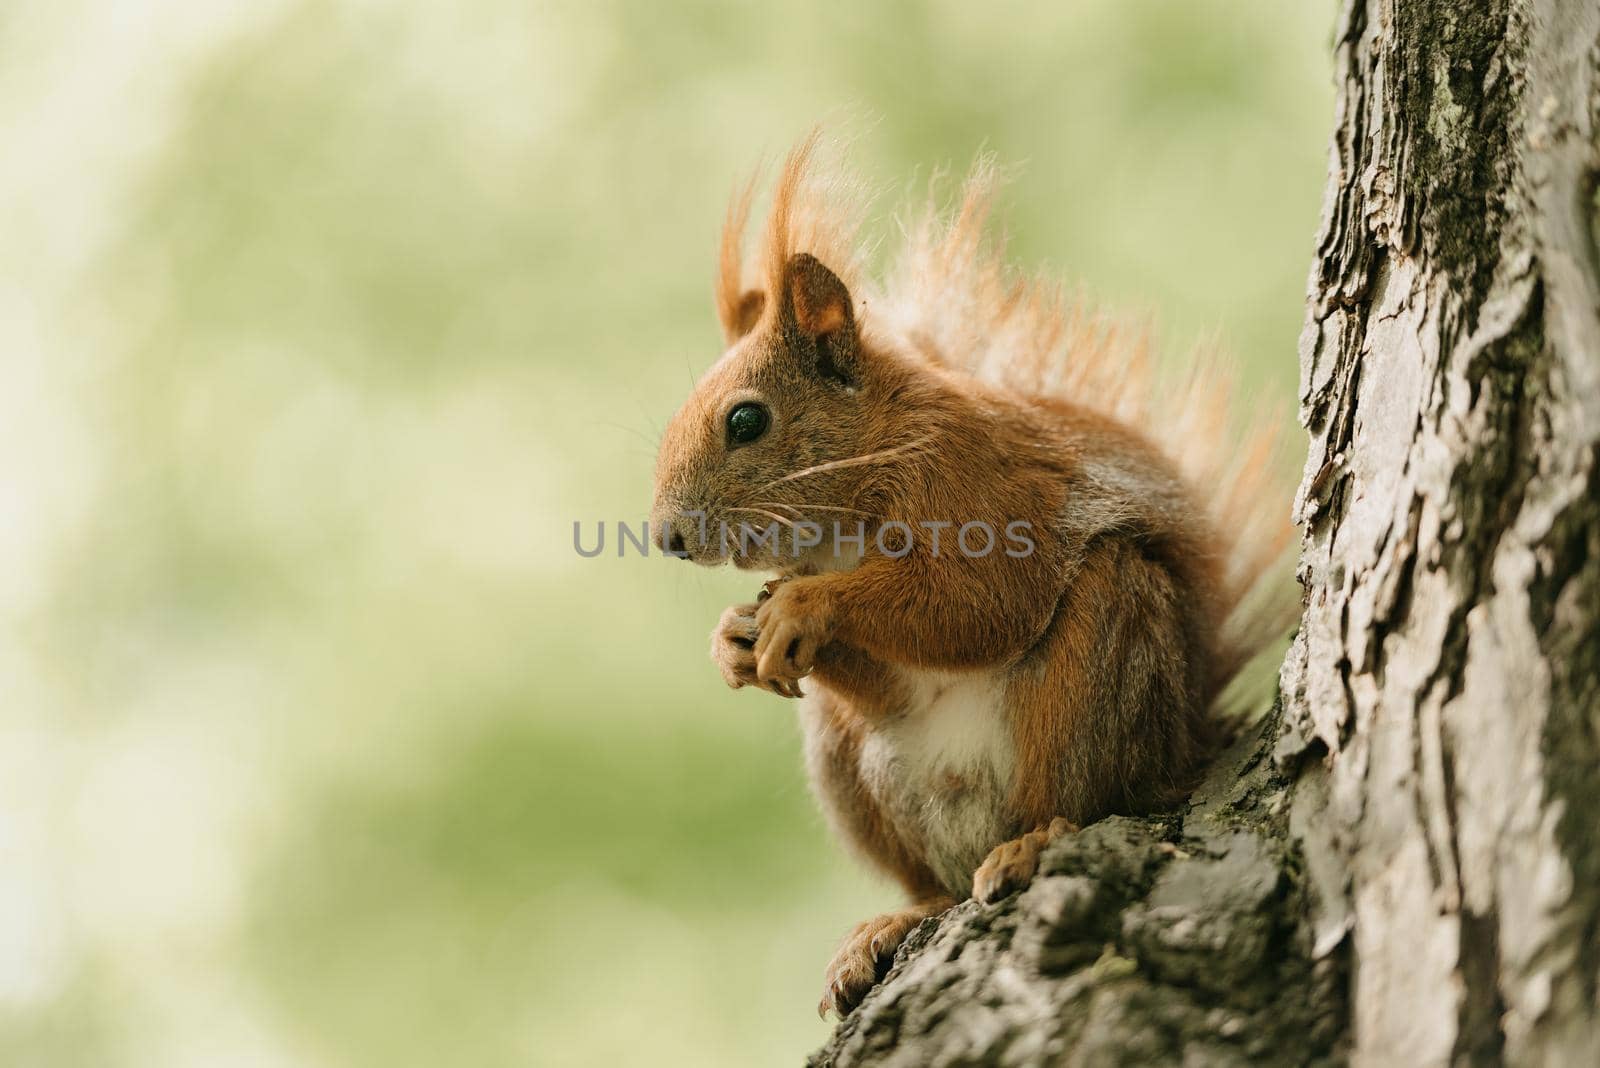 The red squirrel is eating a nut on the branch of the tree in the Royal Baths Park, Lazienki Park